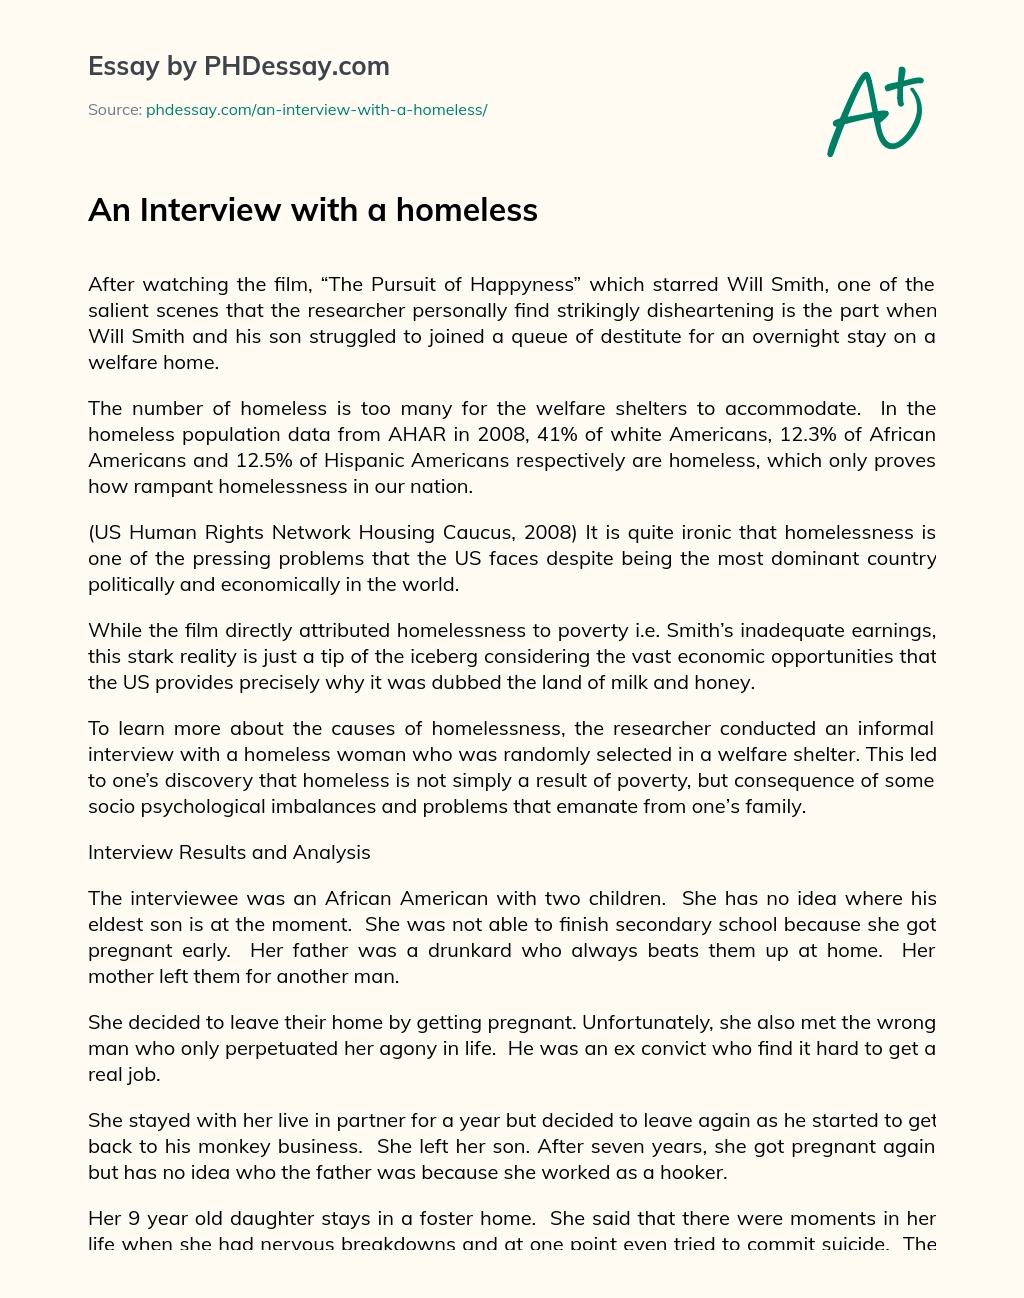 An Interview with a homeless essay